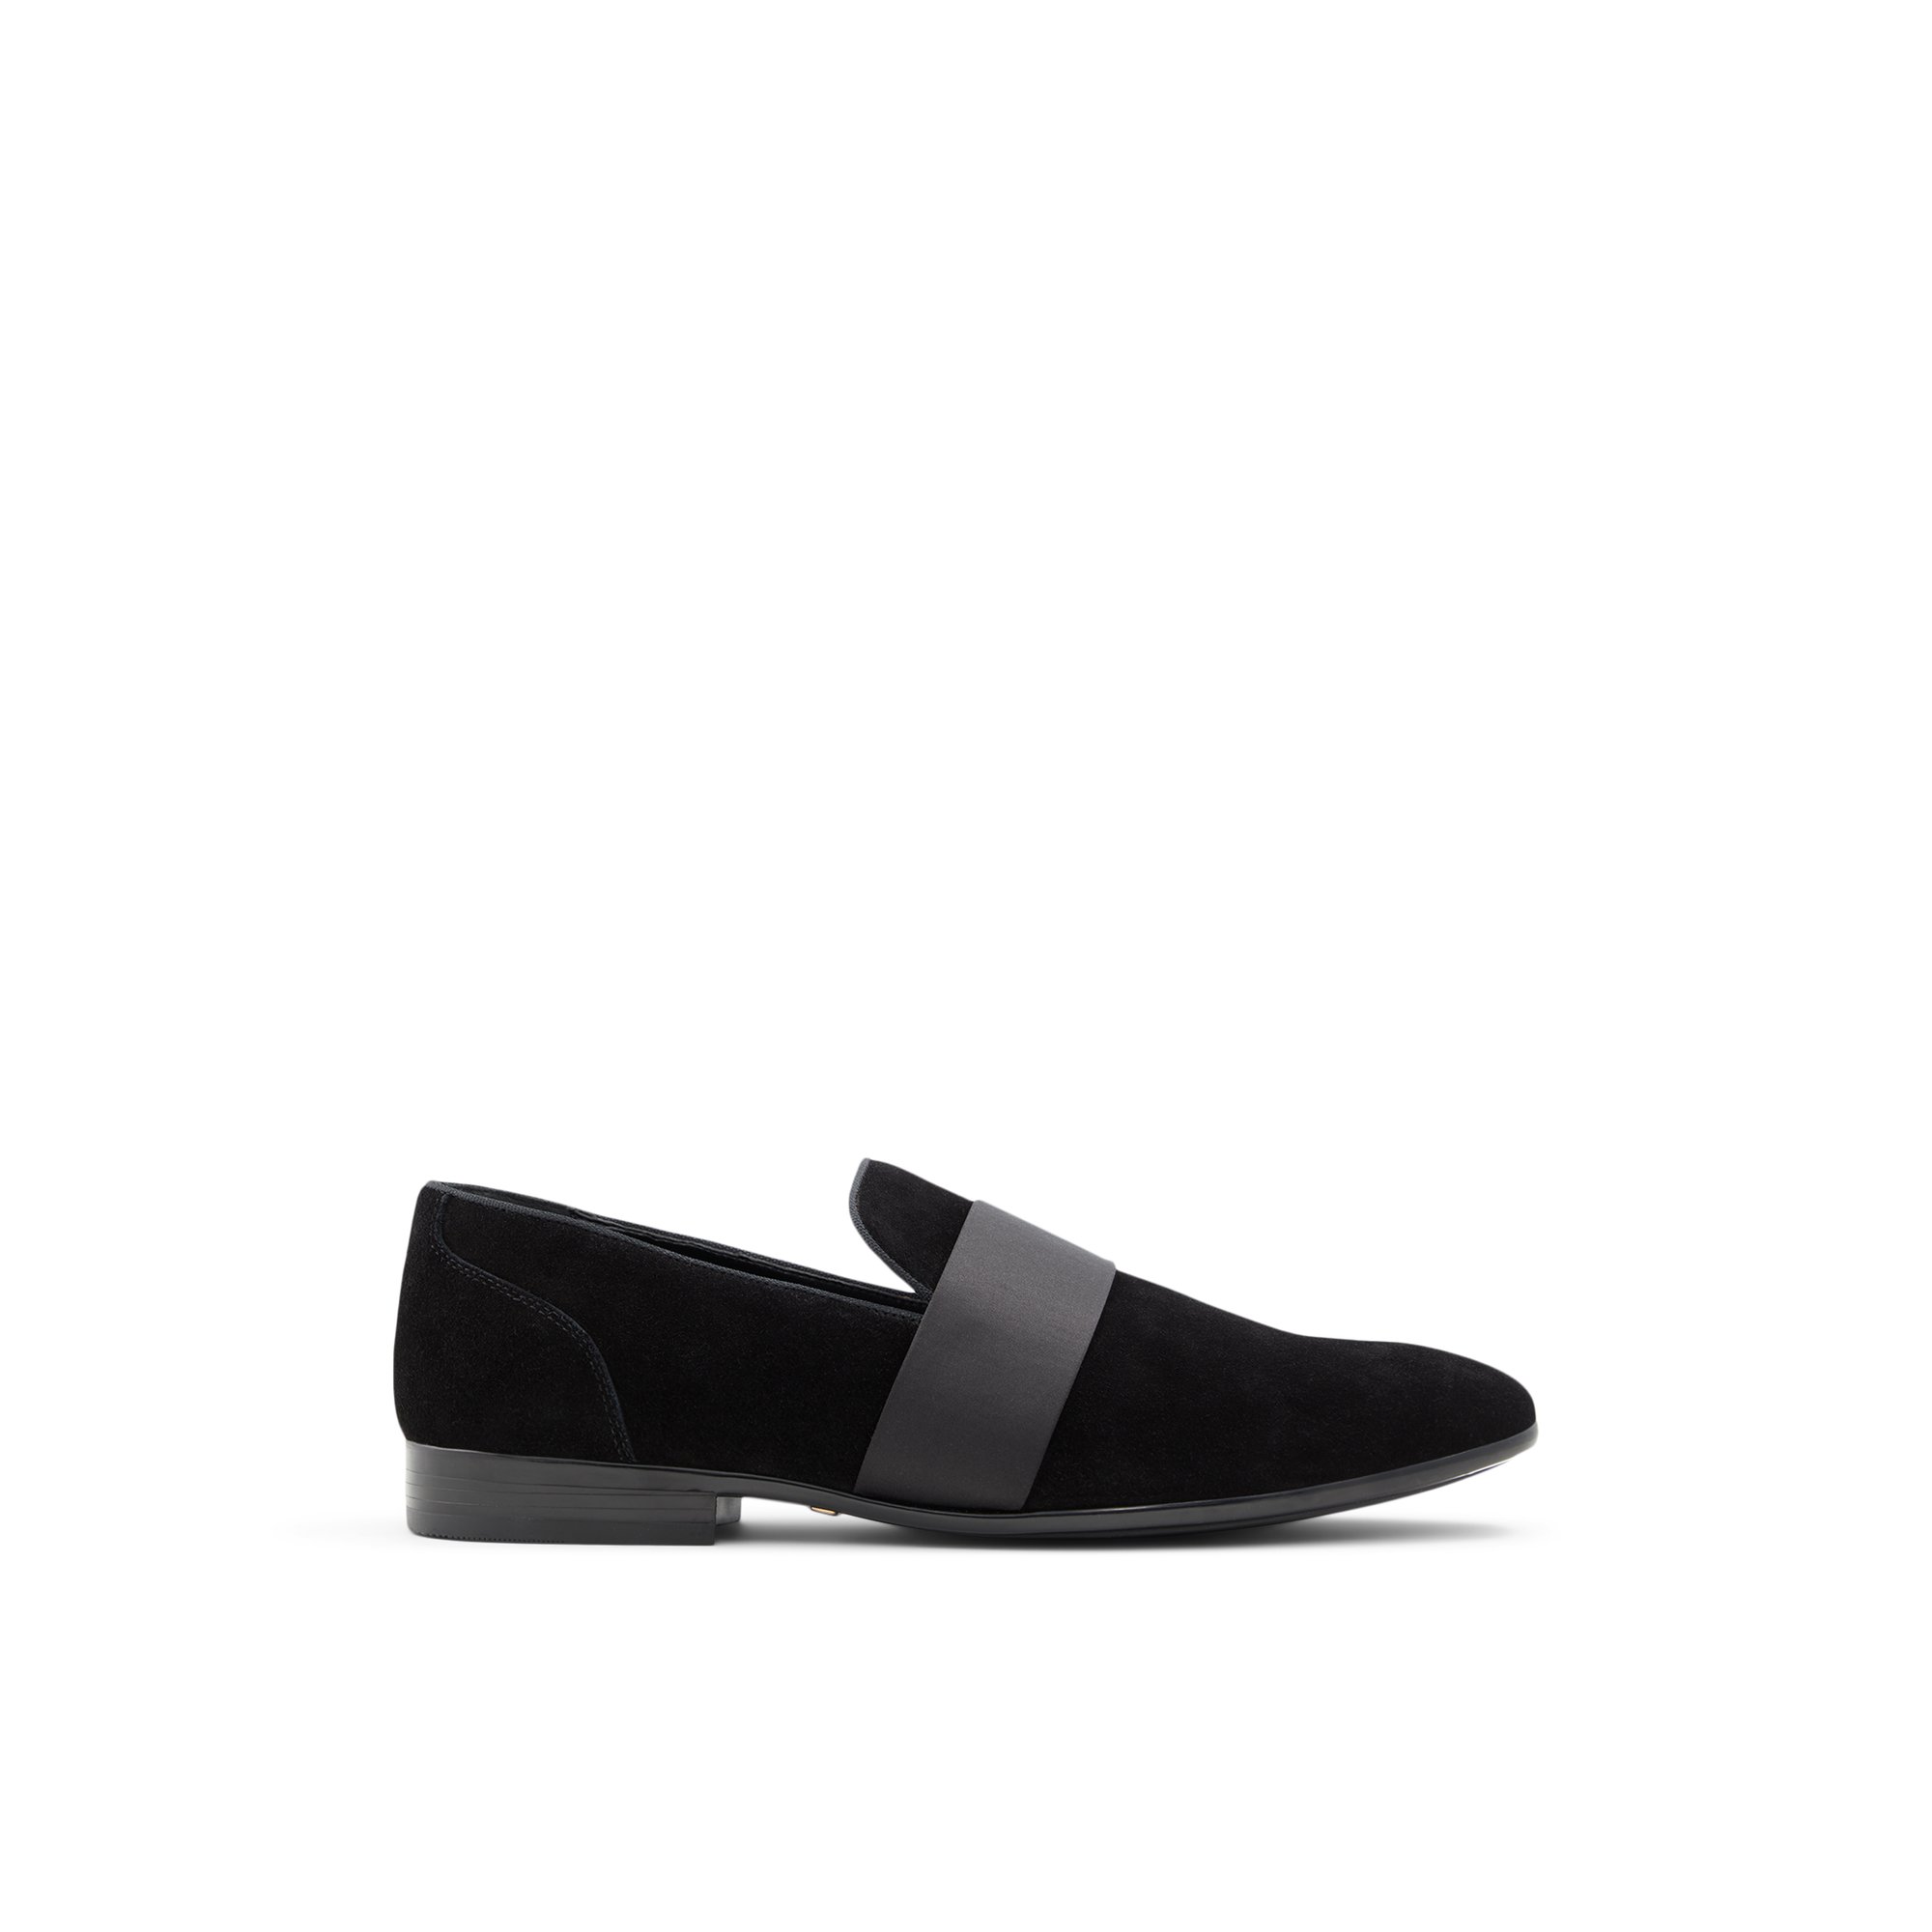 Image of ALDO Asaria - Men's Loafers and Slip on - Black, Size 10.5